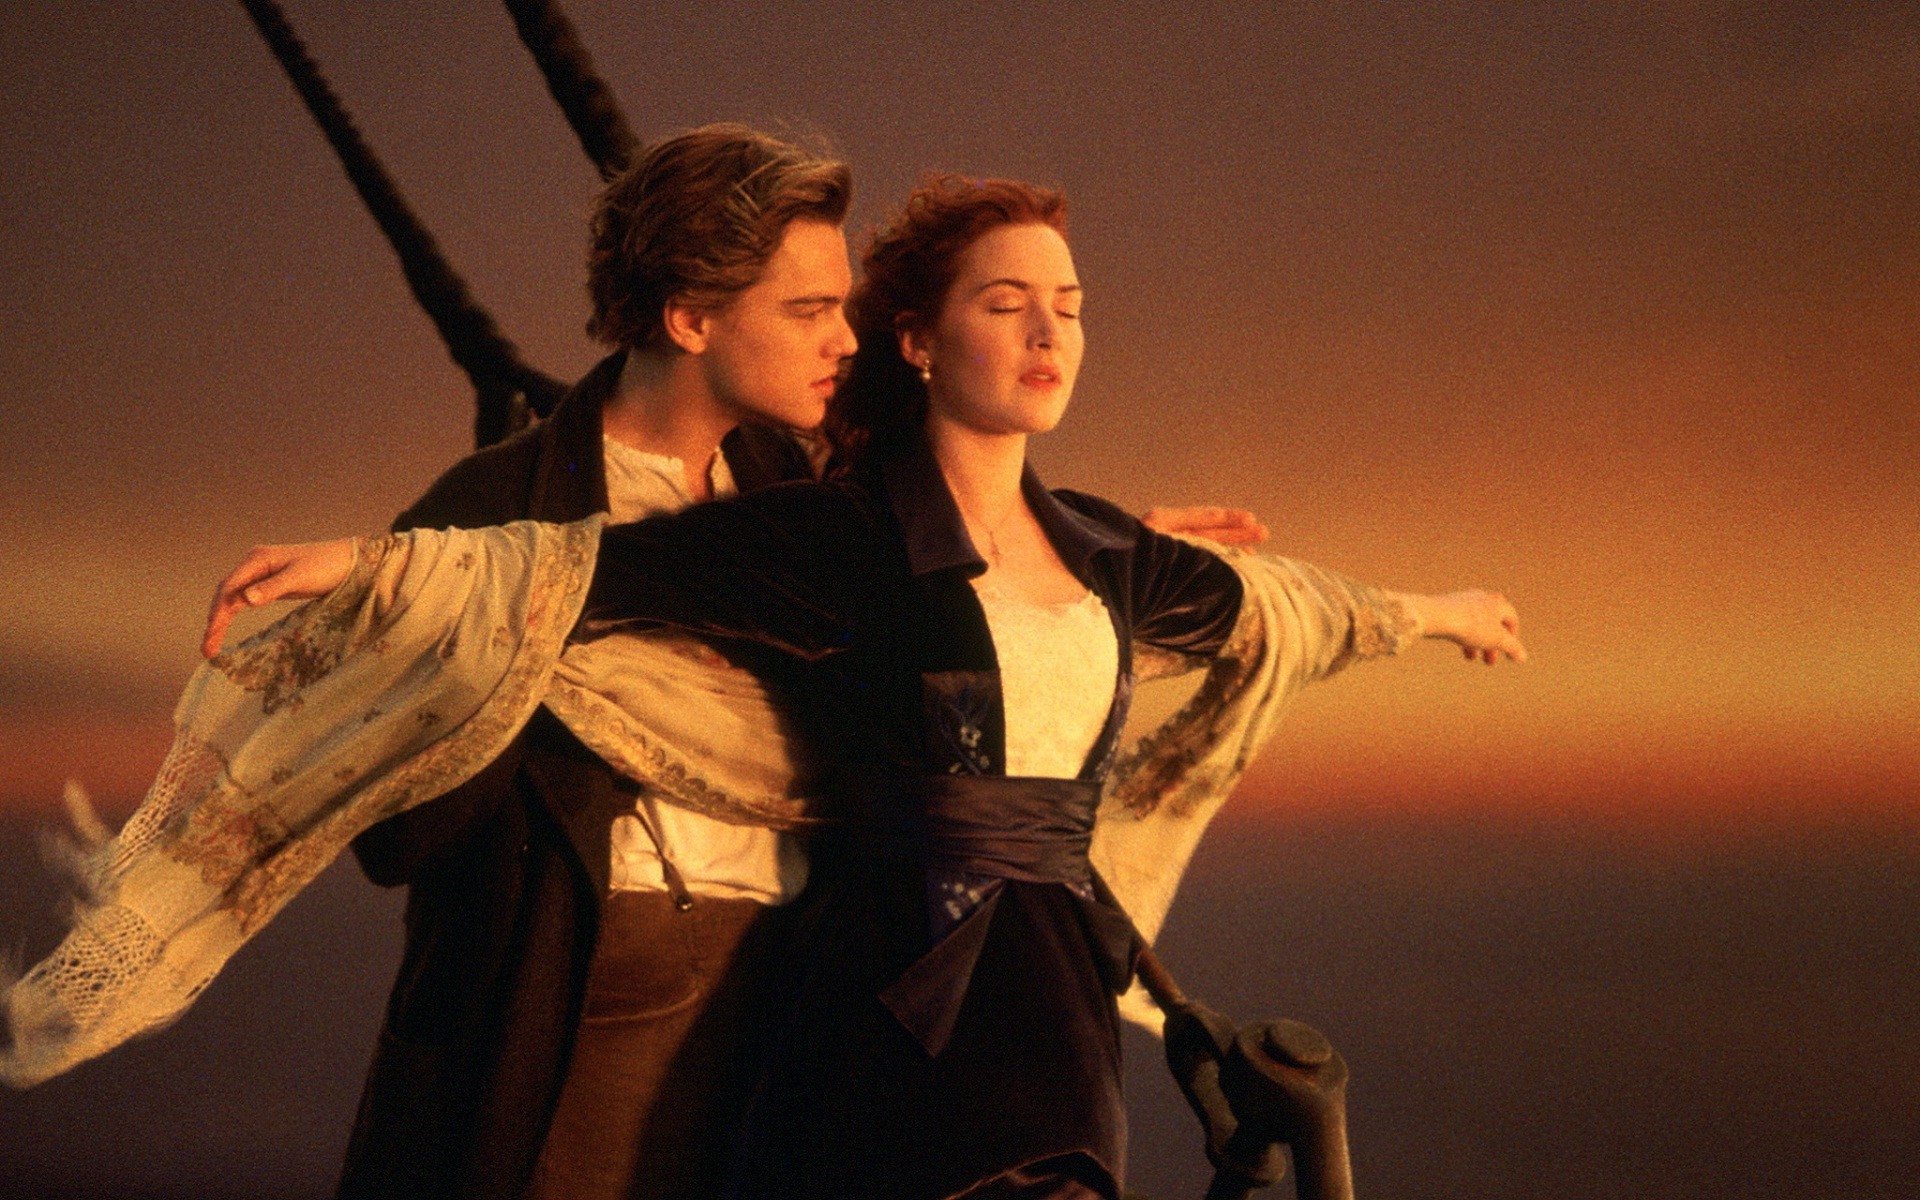 1920x1200 2286x1600 HD Wallpaper and background photos of Jack & Rose - TITANIC for  fans of Titanic images.